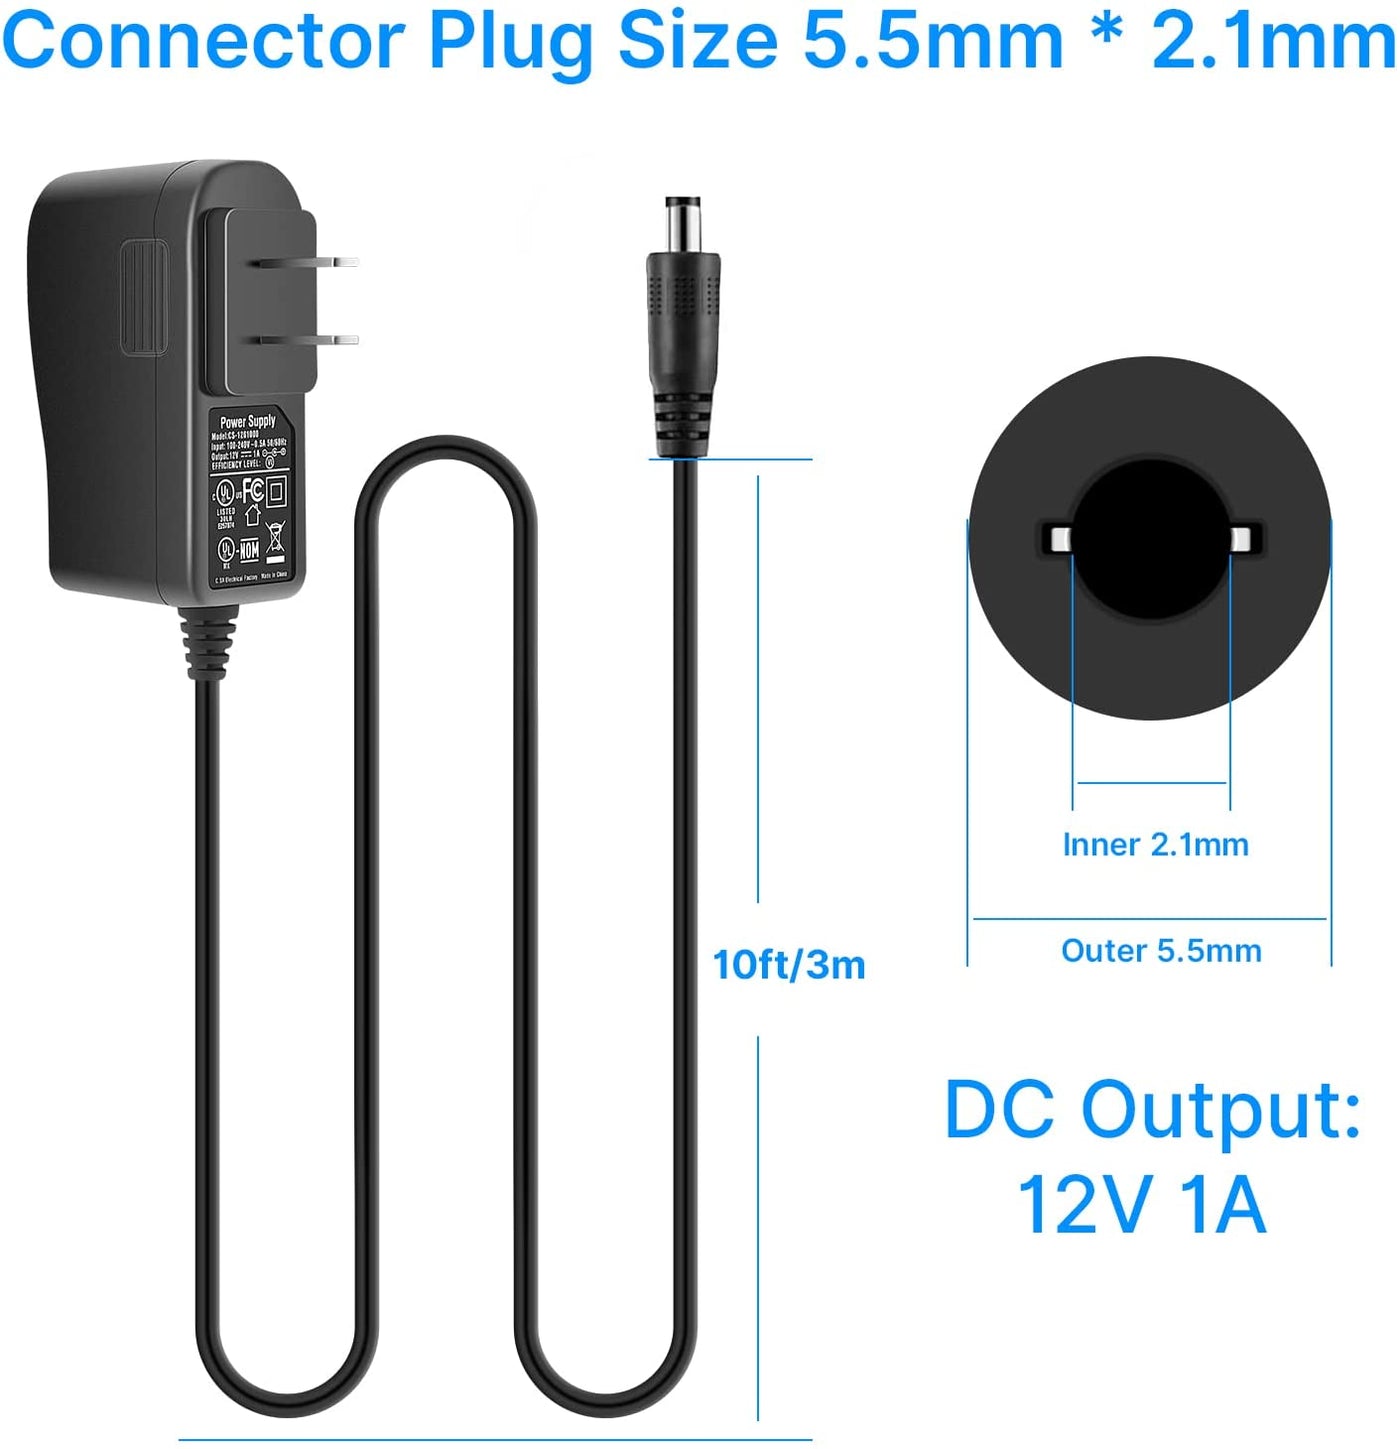  DC 12V 2A UL-Listed Power Supply,DC 12V Power Adapter DC12V  Cable 12V DC Cord,5.5mm x 2.5mm DC Jack for LED Strip,CCTV Camera,Wireless  Router,Monitor,Video Phone,Display, Black : Electronics